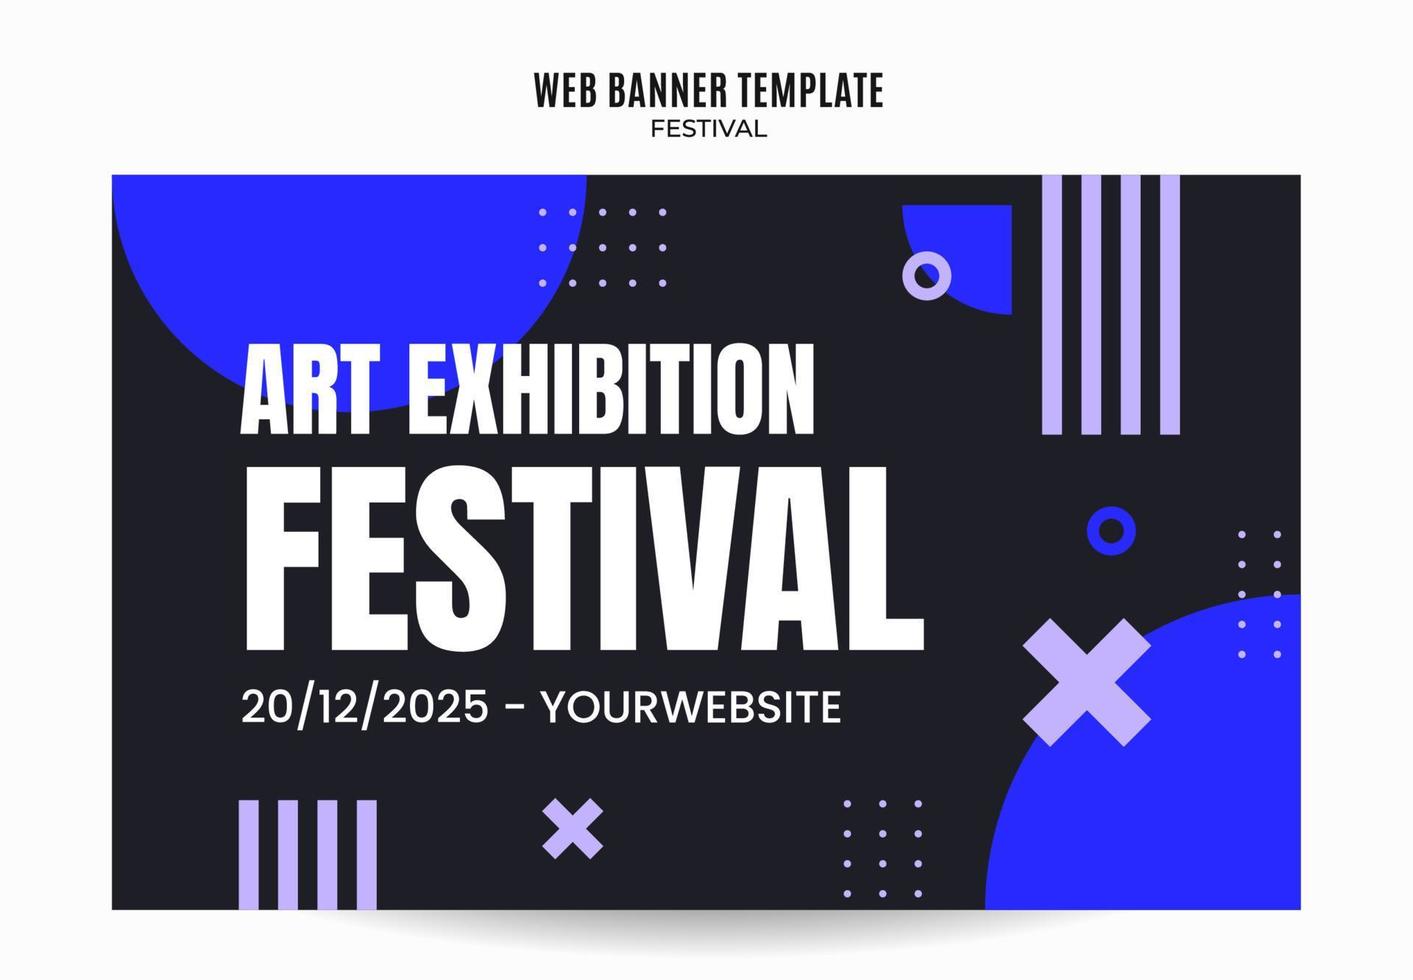 Festival Web Banner for Social Media Poster, banner, space area and background vector